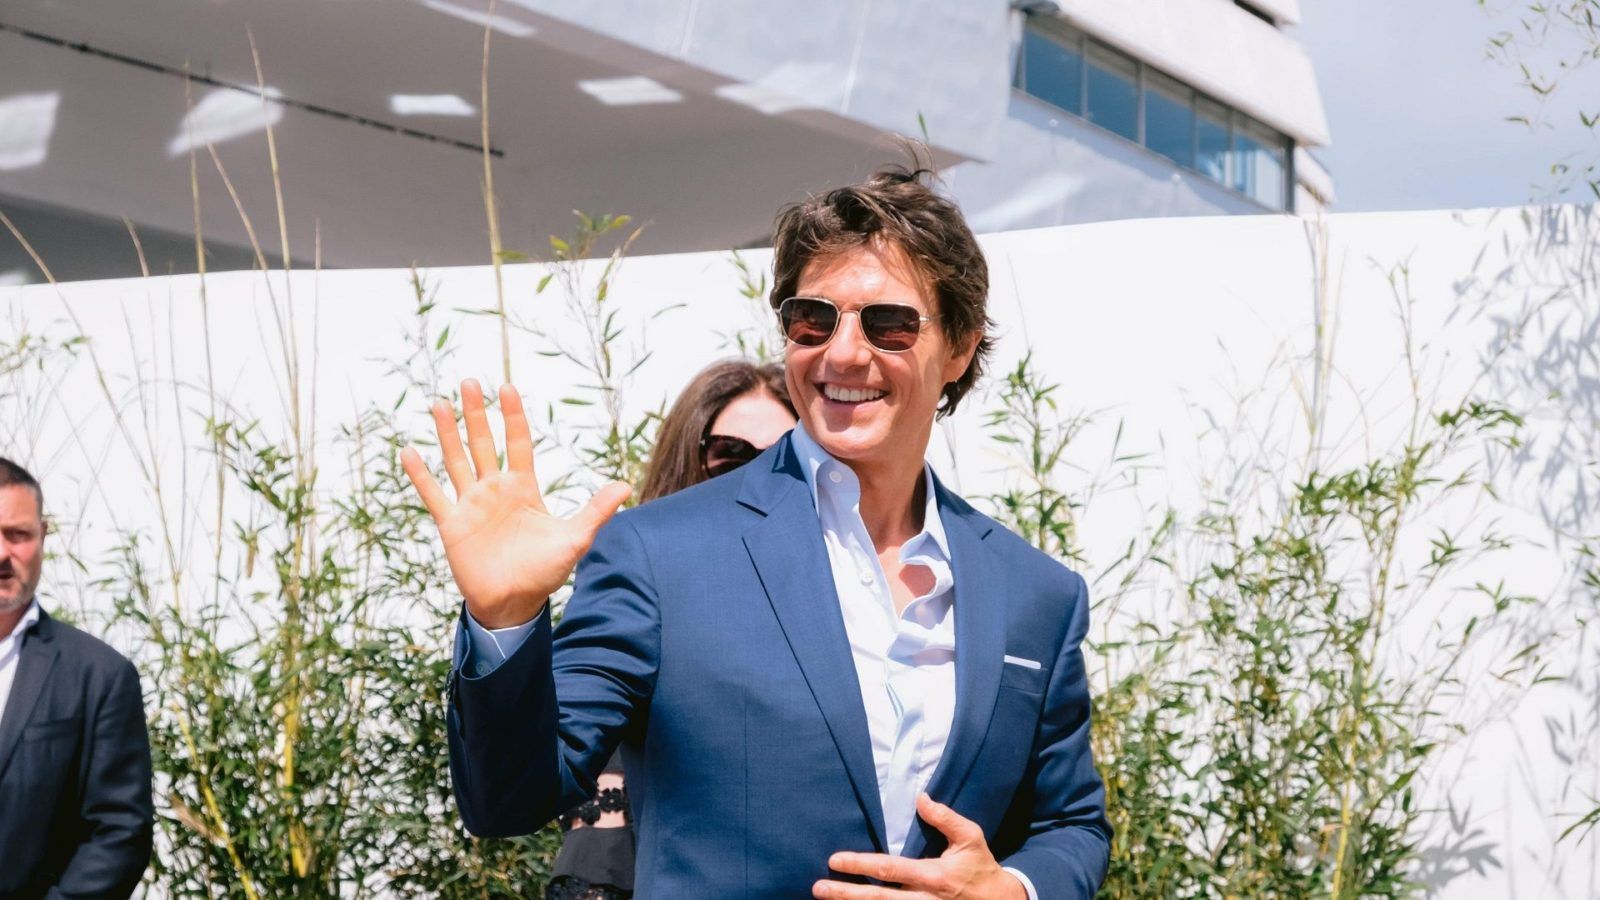 Cannes 2022: Tom Cruise gets honorary Palme d’Or at ‘Top Gun: Maverick’ premiere